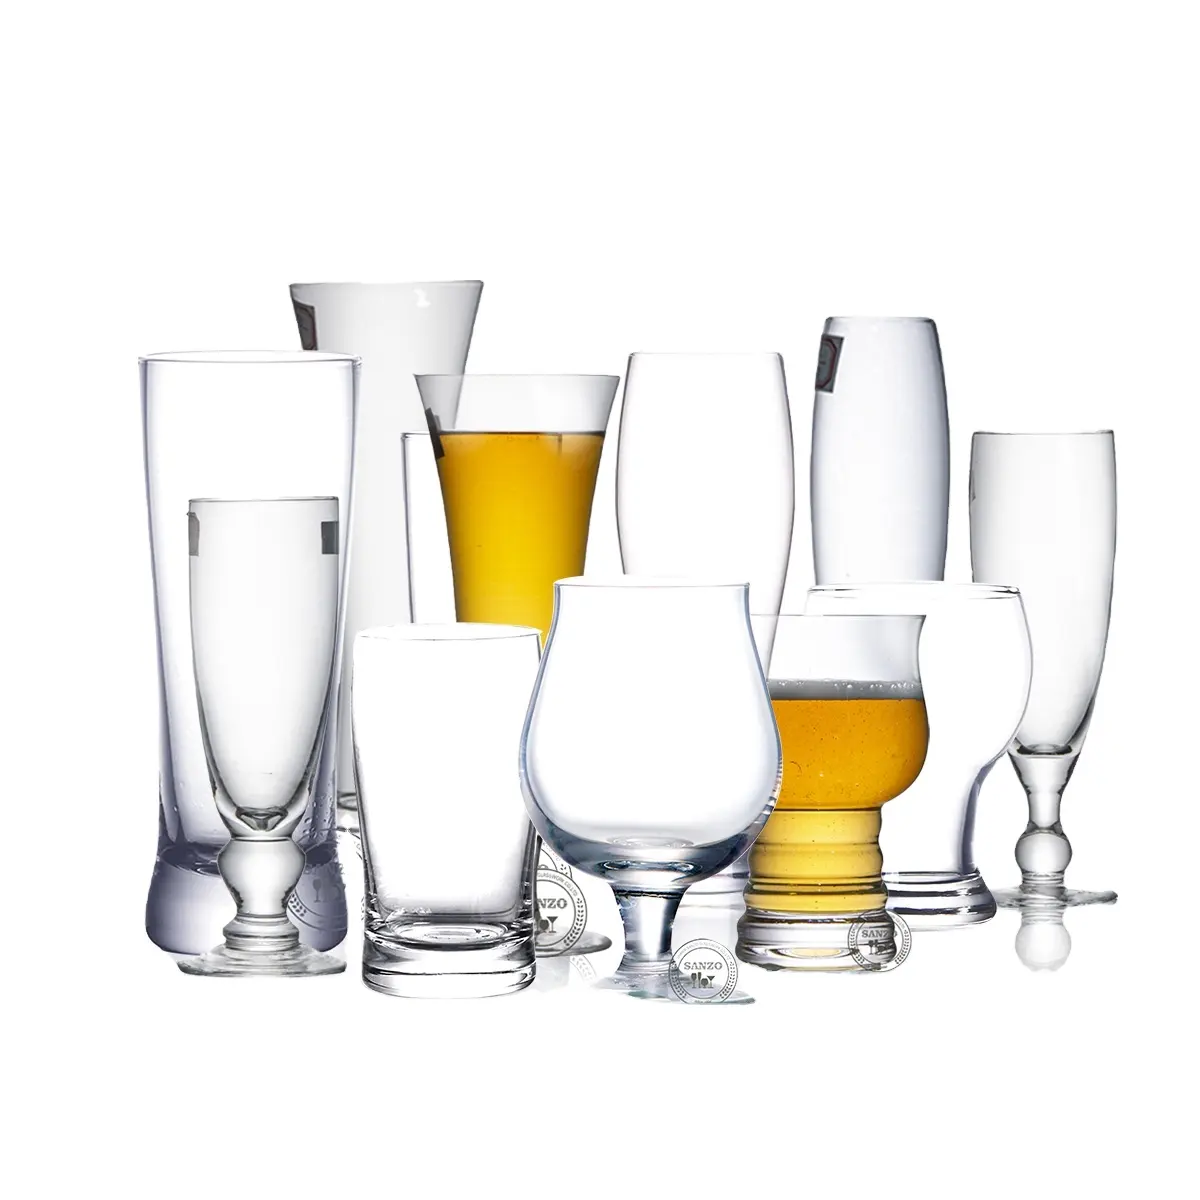 High-grade crystal glass beer mugs are fashionable and simple